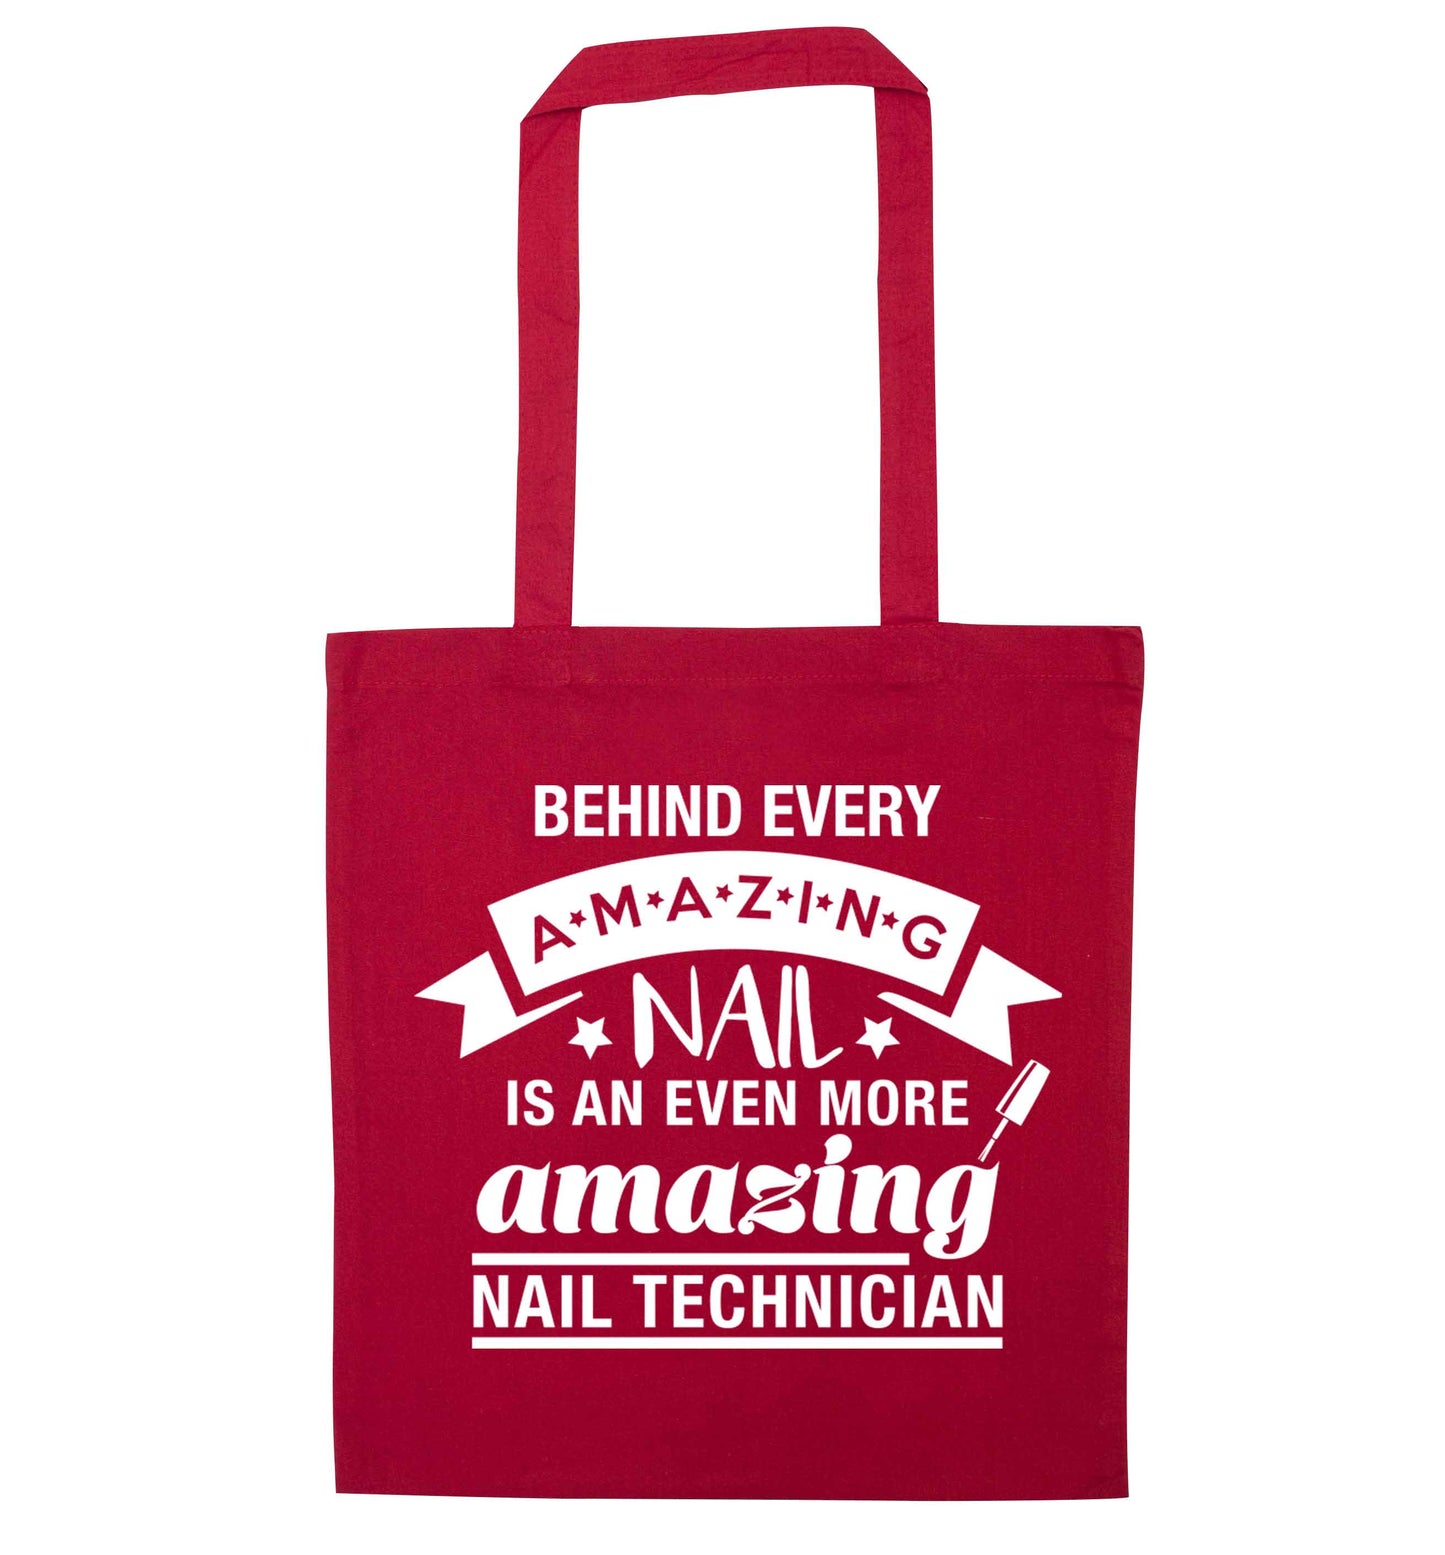 Behind every amazing nail is an even more amazing nail technician red tote bag